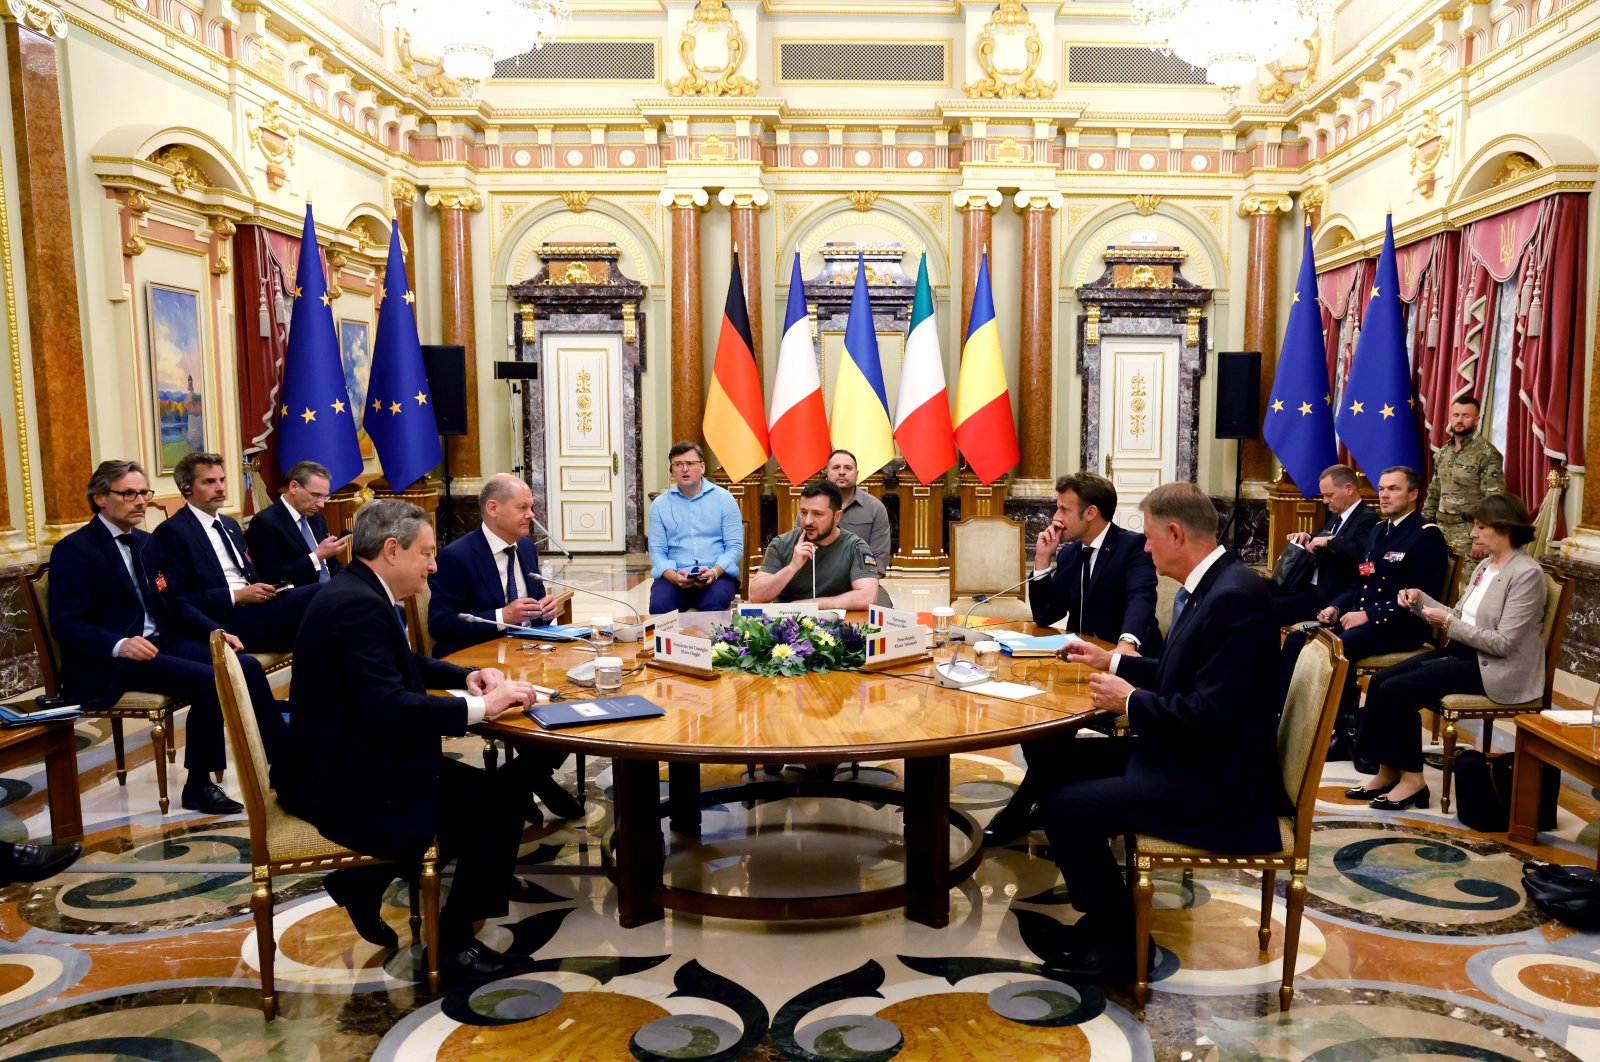 Italian Prime Minister Mario Draghi (L), German Chancellor Olaf Scholz ( 2nd L), Ukrainian President Volodymyr Zelenskyy (C), French President Emmanuel Macron (2nd R), and Romanian President Klaus Iohannis meet for a working session in Mariinsky Palace, Kyiv, Ukraine, June 16, 2022. (AP Photo)